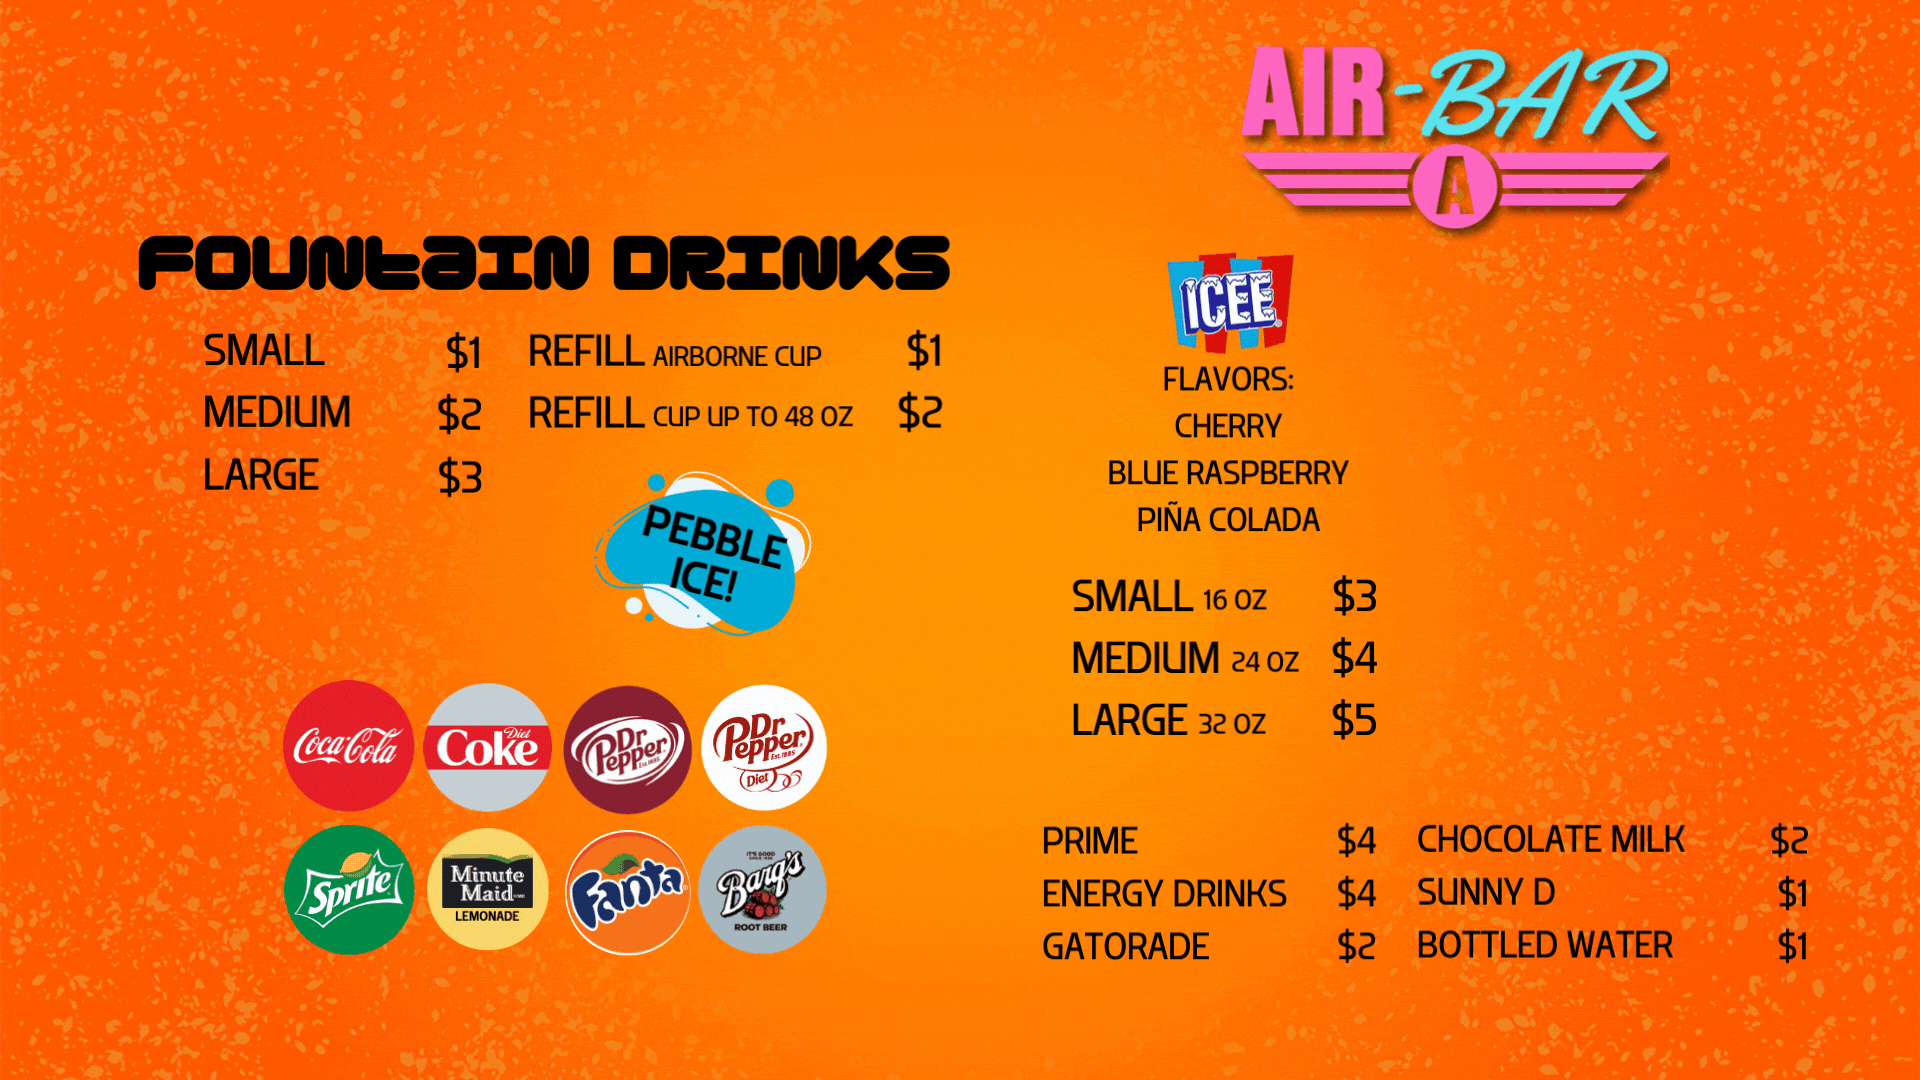 A menu sign with drink choices and prices for customers at an air bar.